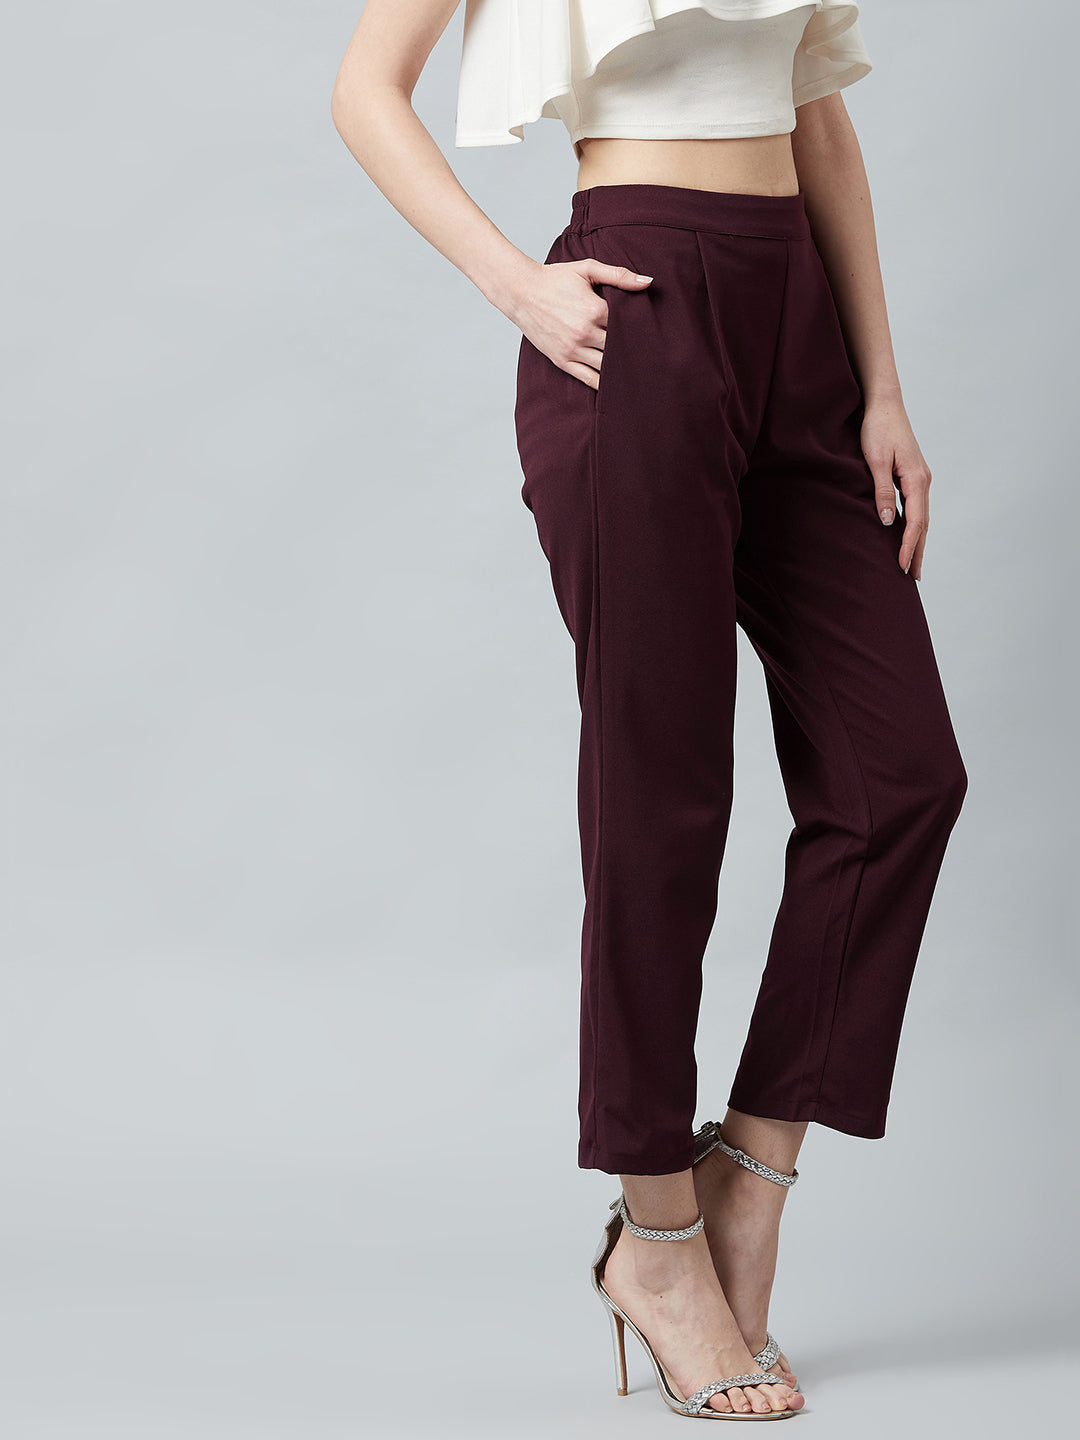 Cotton Lycra Sky Trouser For Women's.Ladies Casual Trouser,Track Pant,Girls  stylish Trouser Pant.Elastic Staright Pants, for Casual Office Work  wear.Slim Fit Formal Trousers/Pant.formal Trouser For Womens.Womens Trousers  Cotton Pant.Formal Tousers For ...